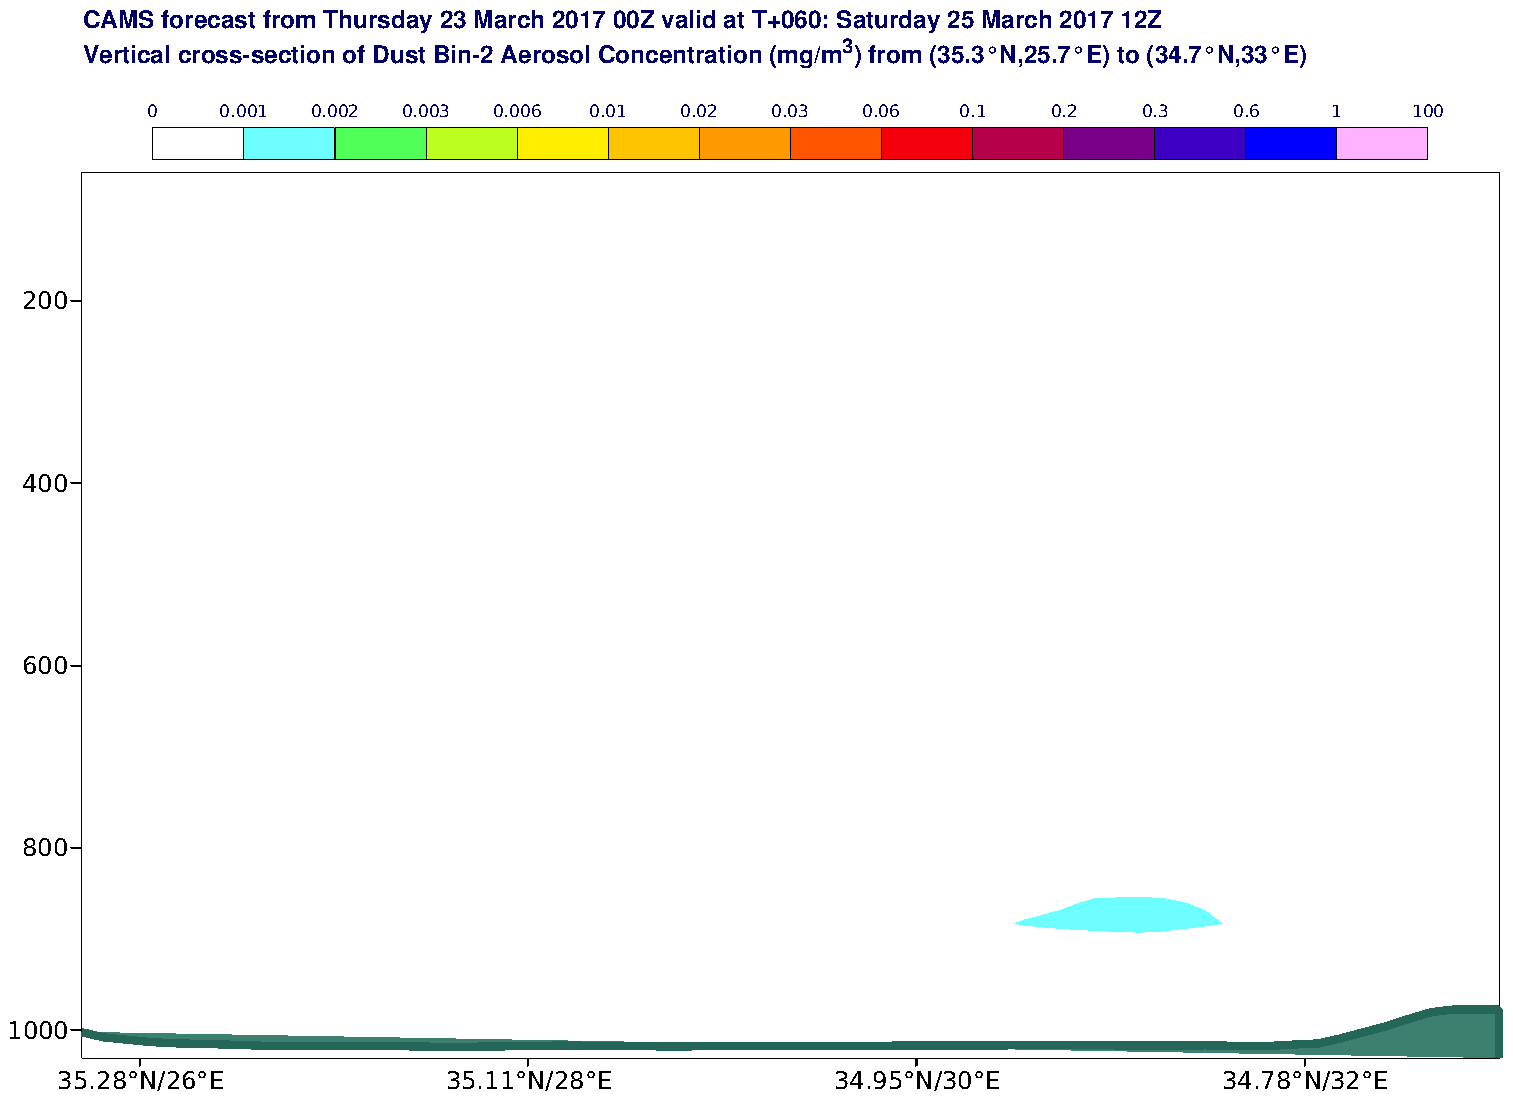 Vertical cross-section of Dust Bin-2 Aerosol Concentration (mg/m3) valid at T60 - 2017-03-25 12:00